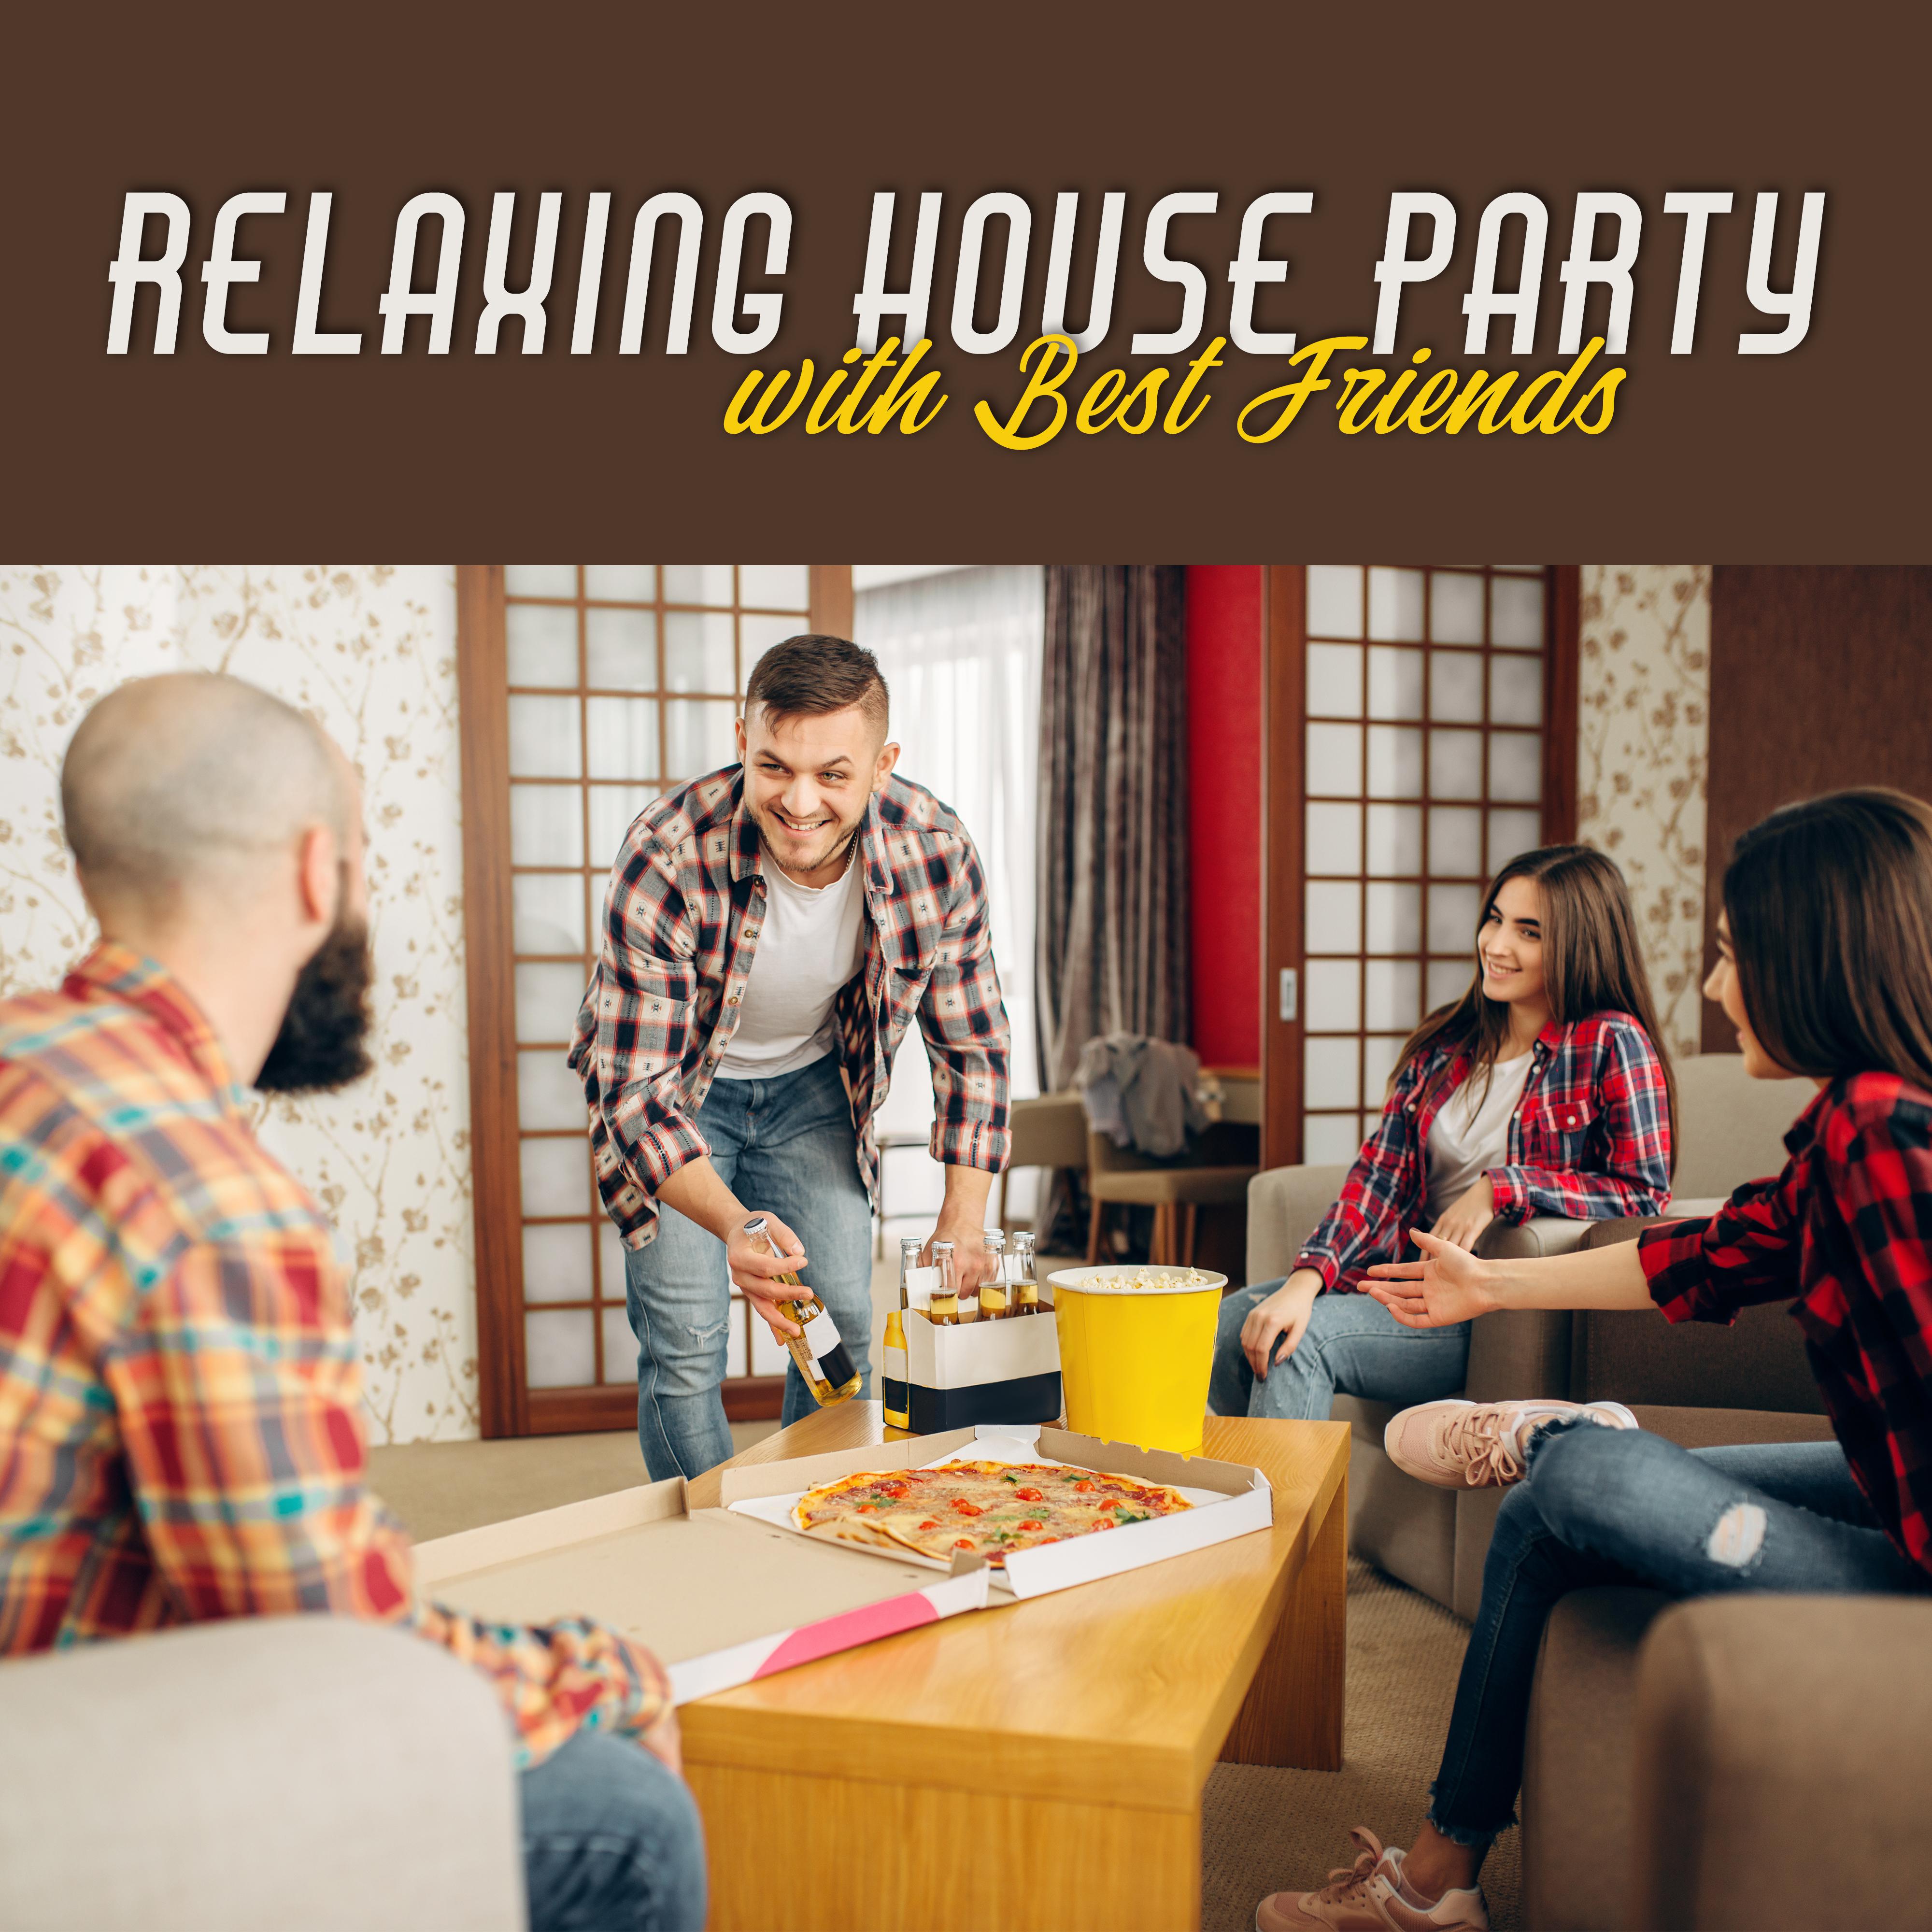 Relaxing House Party with Best Friends: 15 Smooth Instrumental Jazz Songs for Nice Time Spending with Friends, Total Relaxation After Tough Day, Calming Down